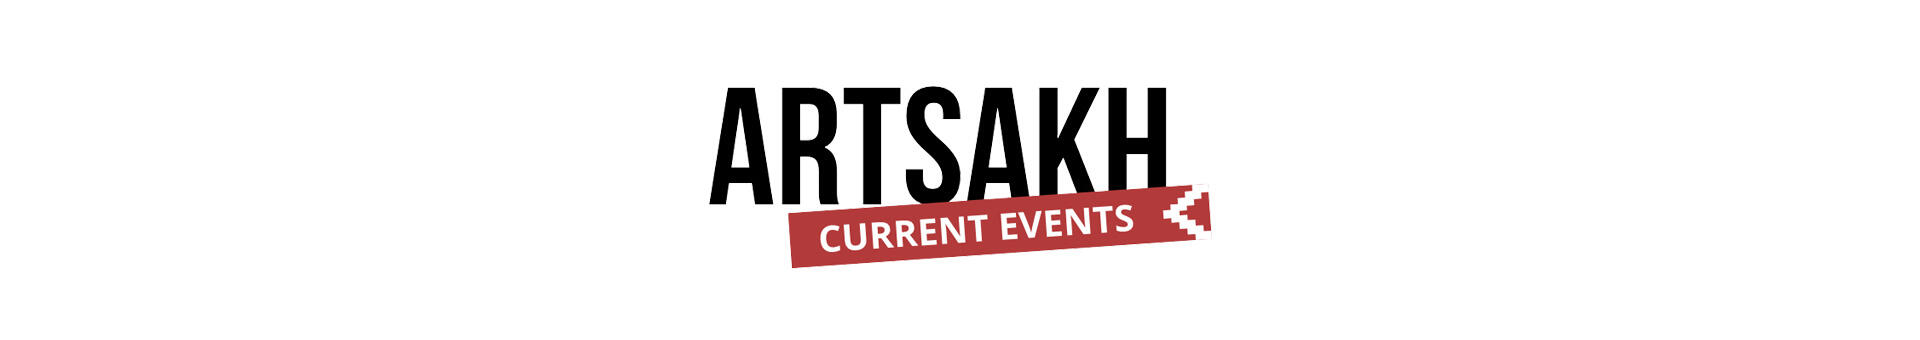 Artsakh Current Events